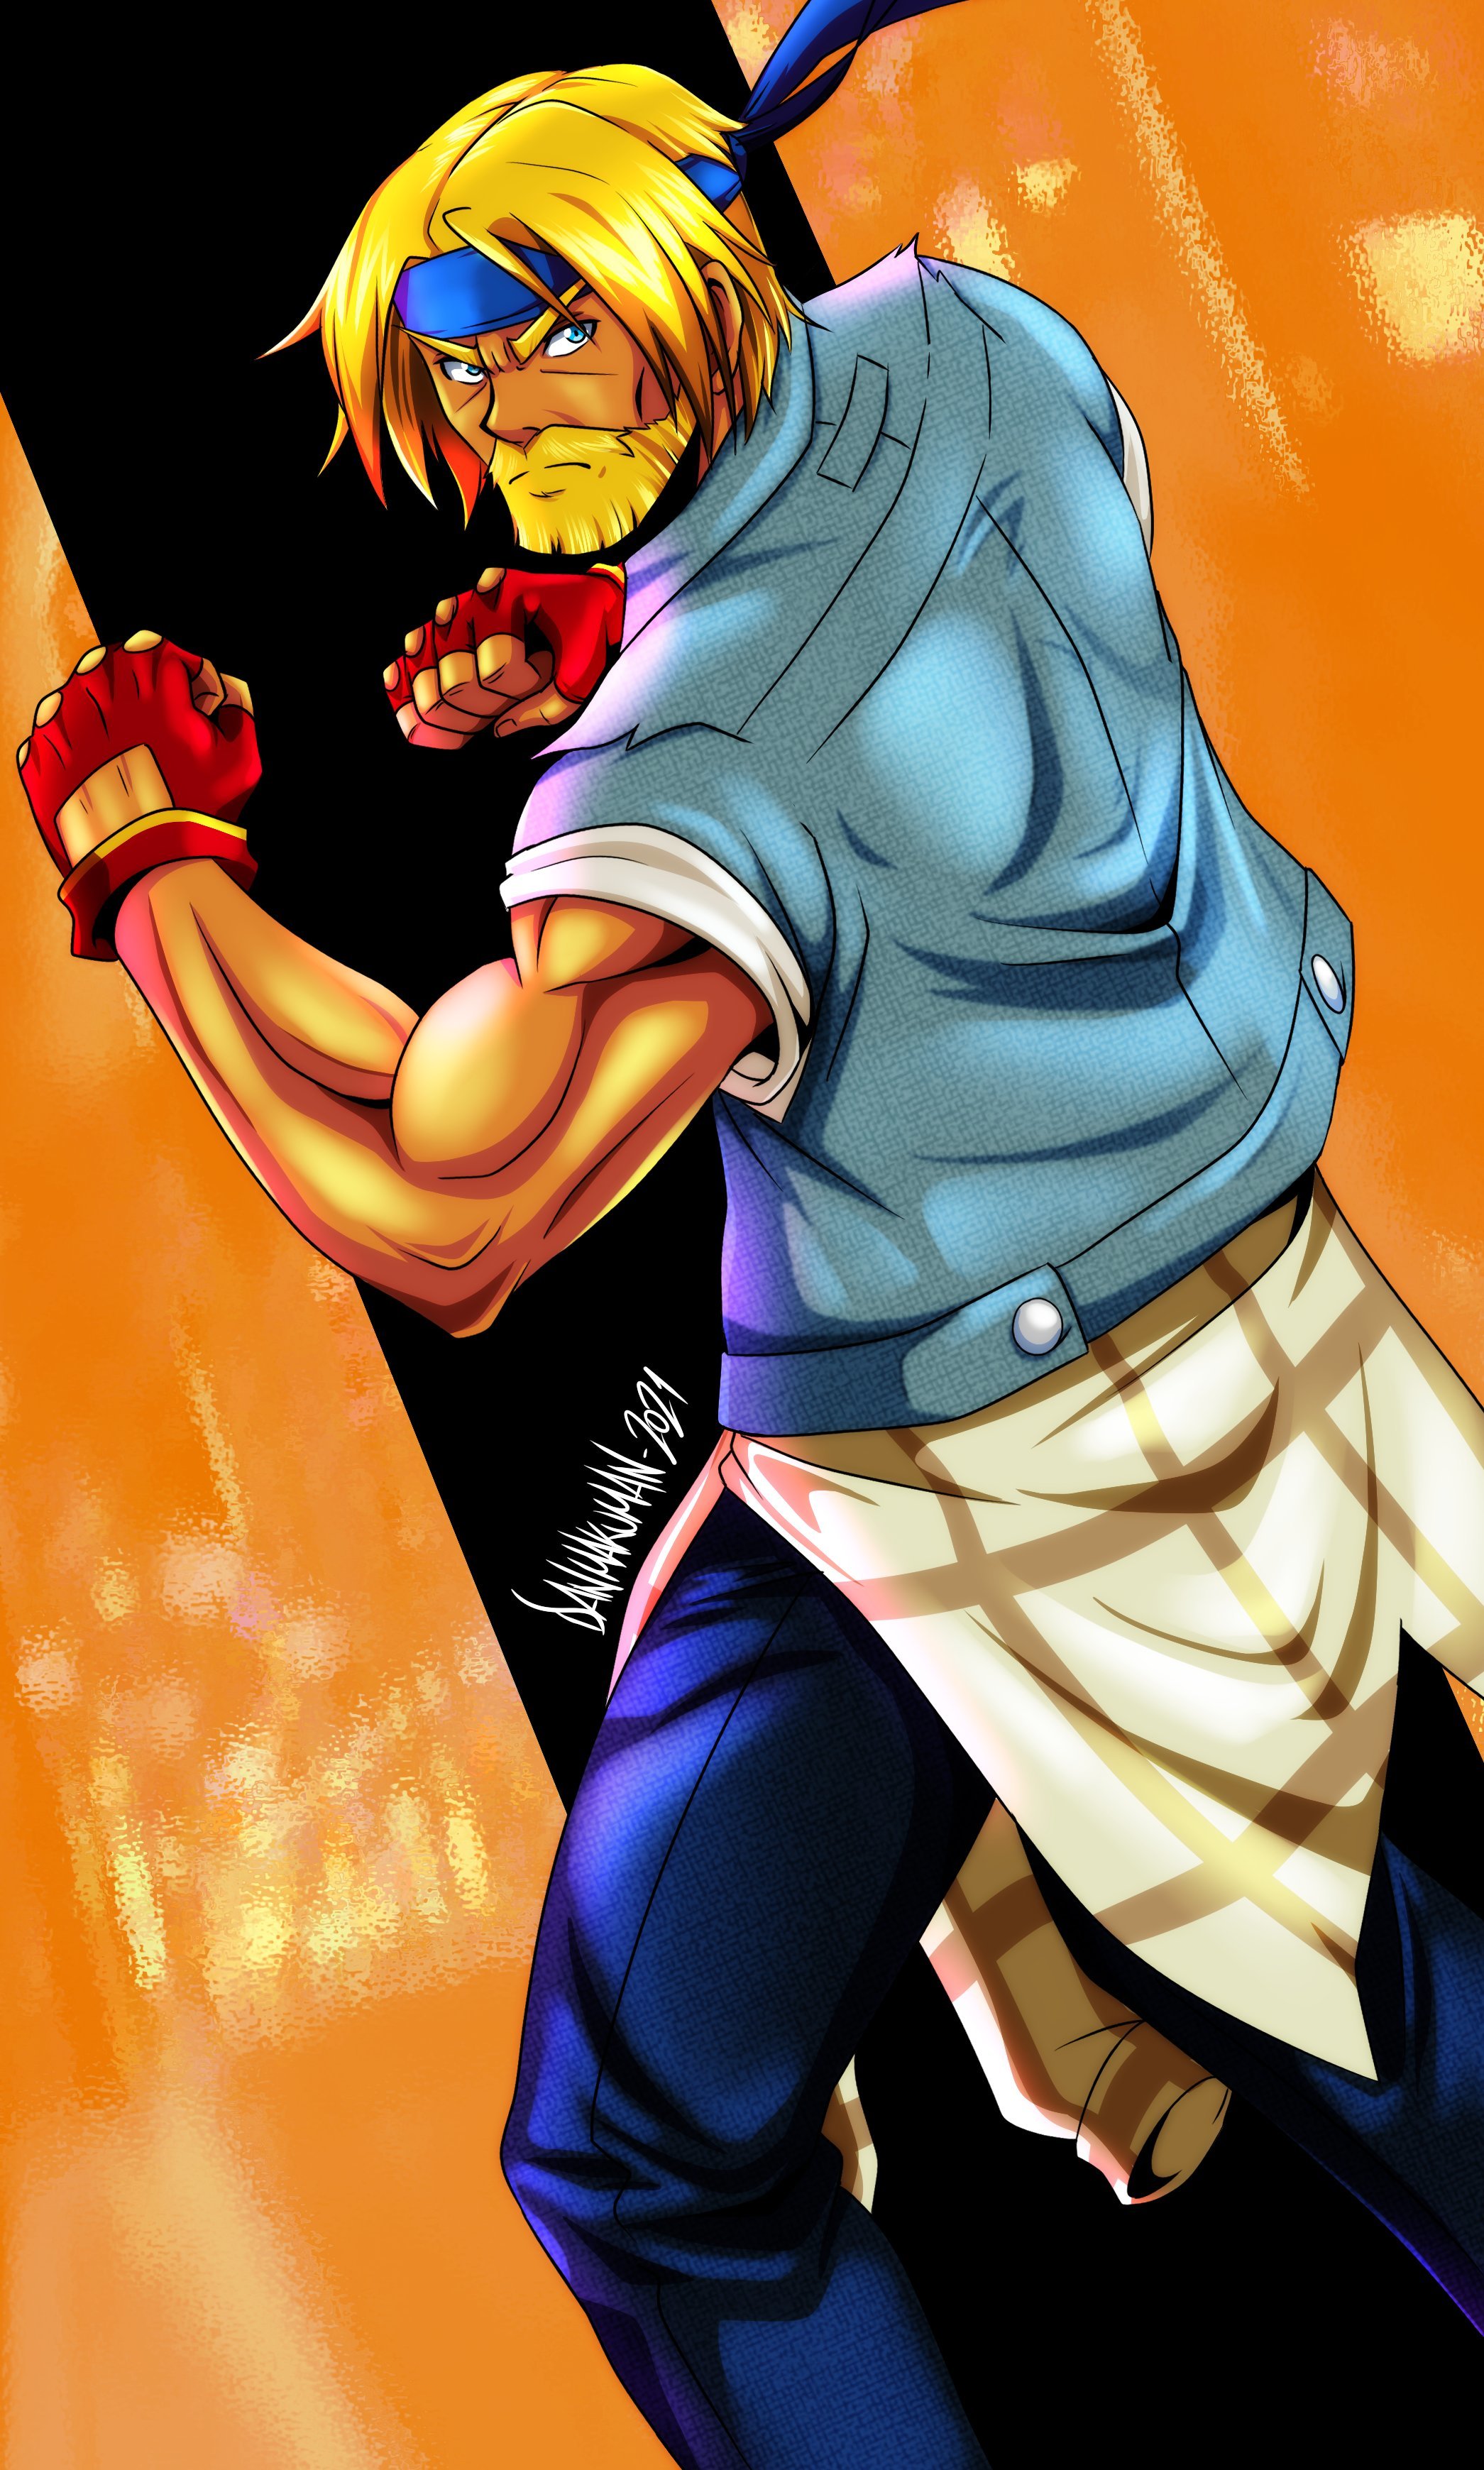 Streets of Rage 4 “Mr. X Nightmare” DLC Adding Max Thunder, Mania+  Difficulty, and More